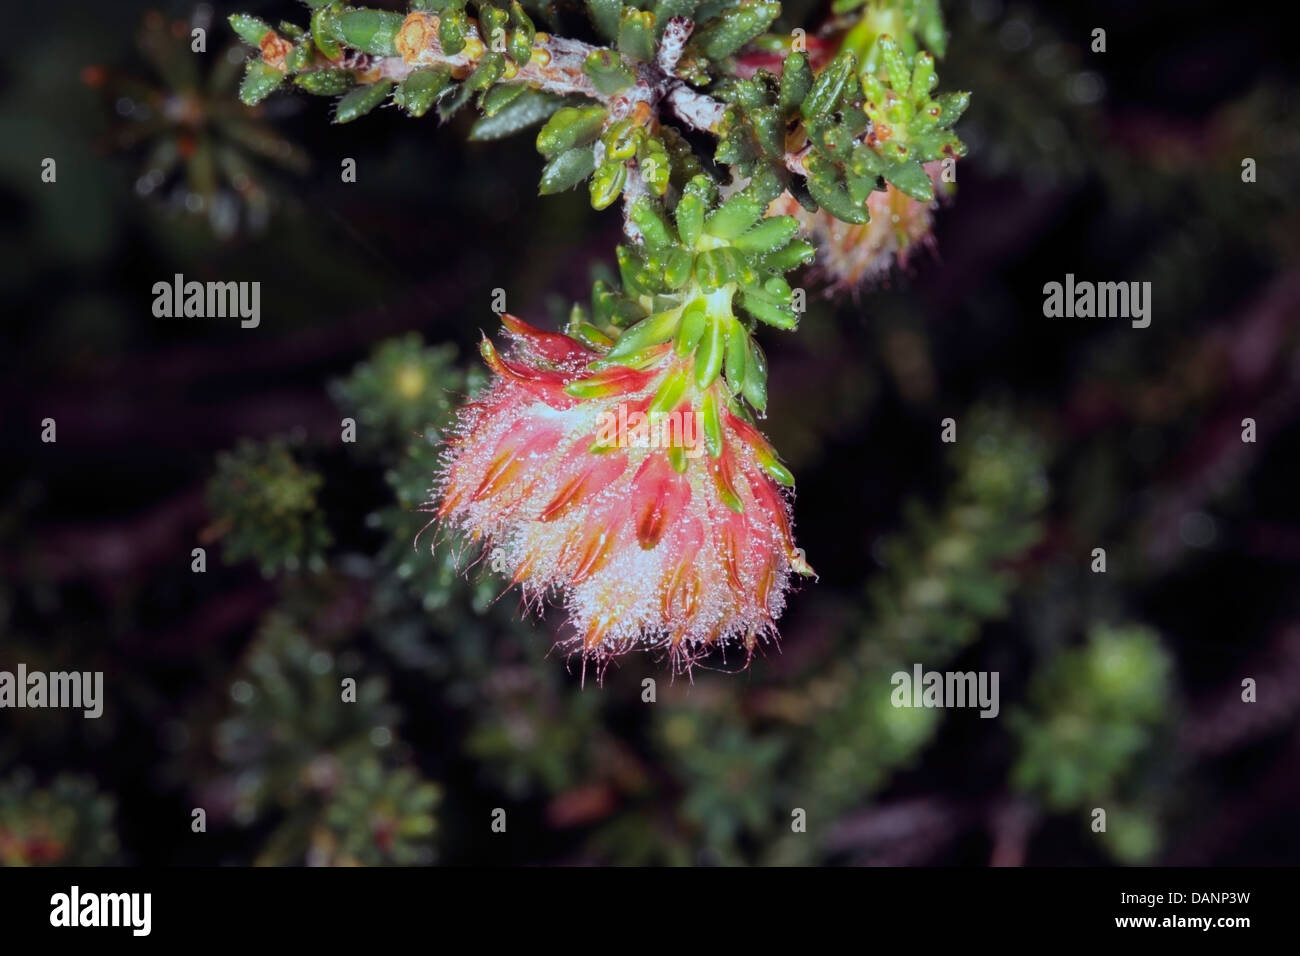 Close-up of flower buds of Fire Erica/Fire Heath/ Red Hairy Heath covered in dew- Erica cerinthoides - Family Ericaceae Stock Photo